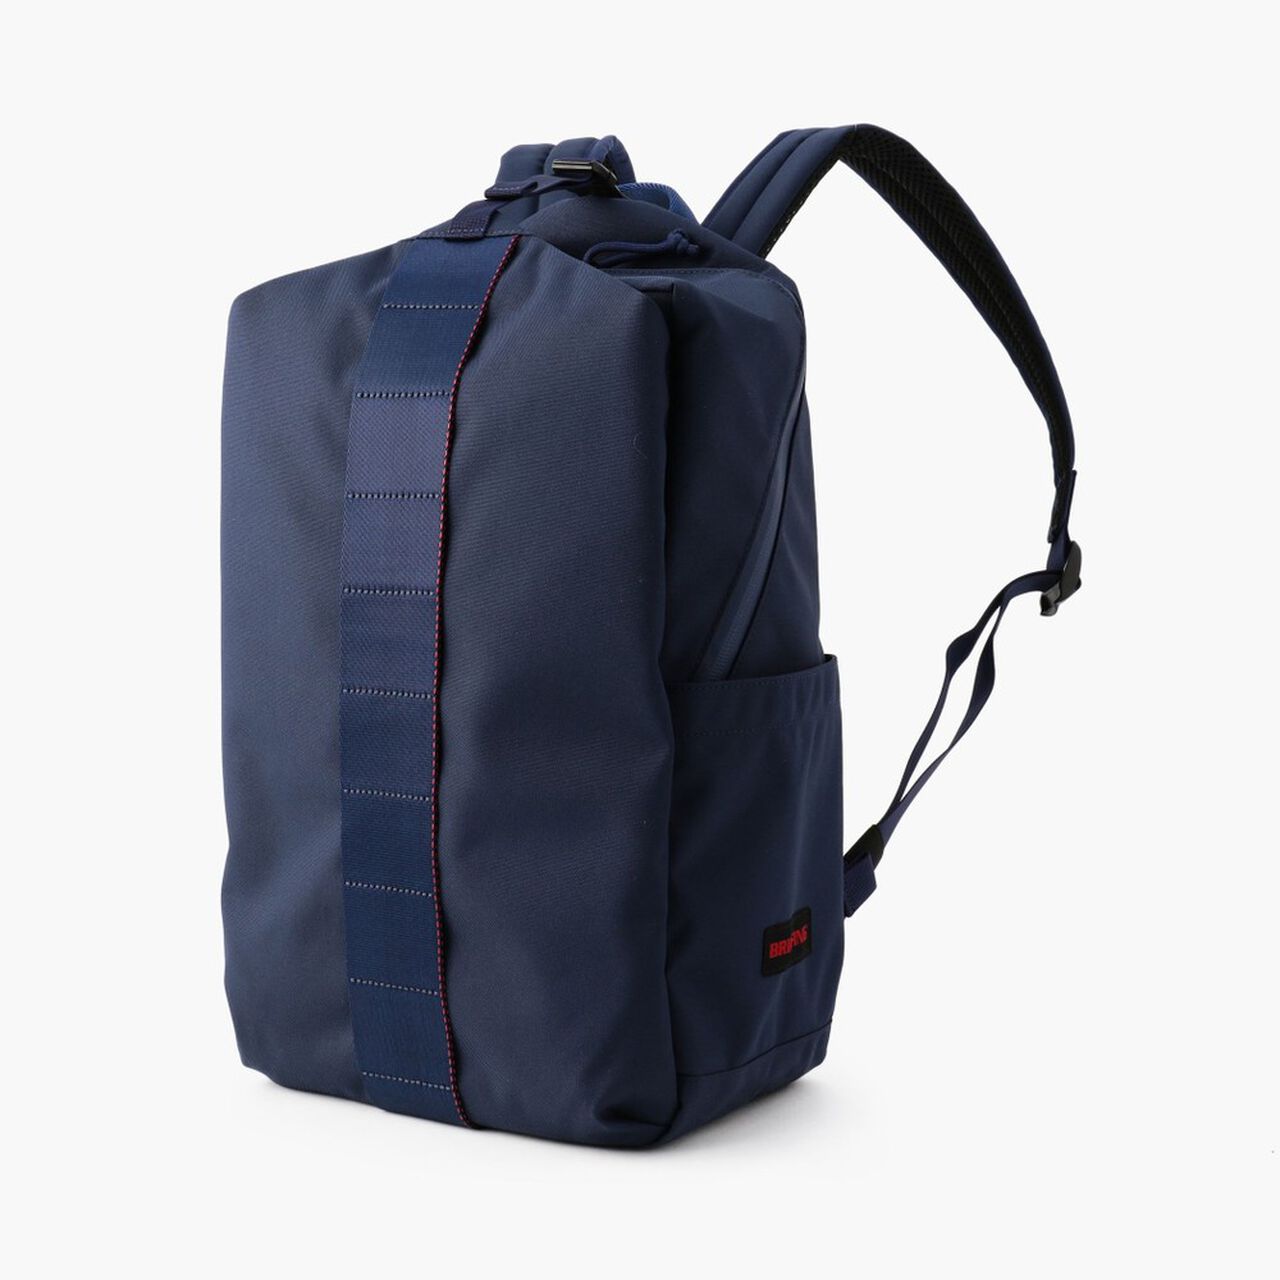 URBAN GYM PACK NEO S,Navy, large image number 0